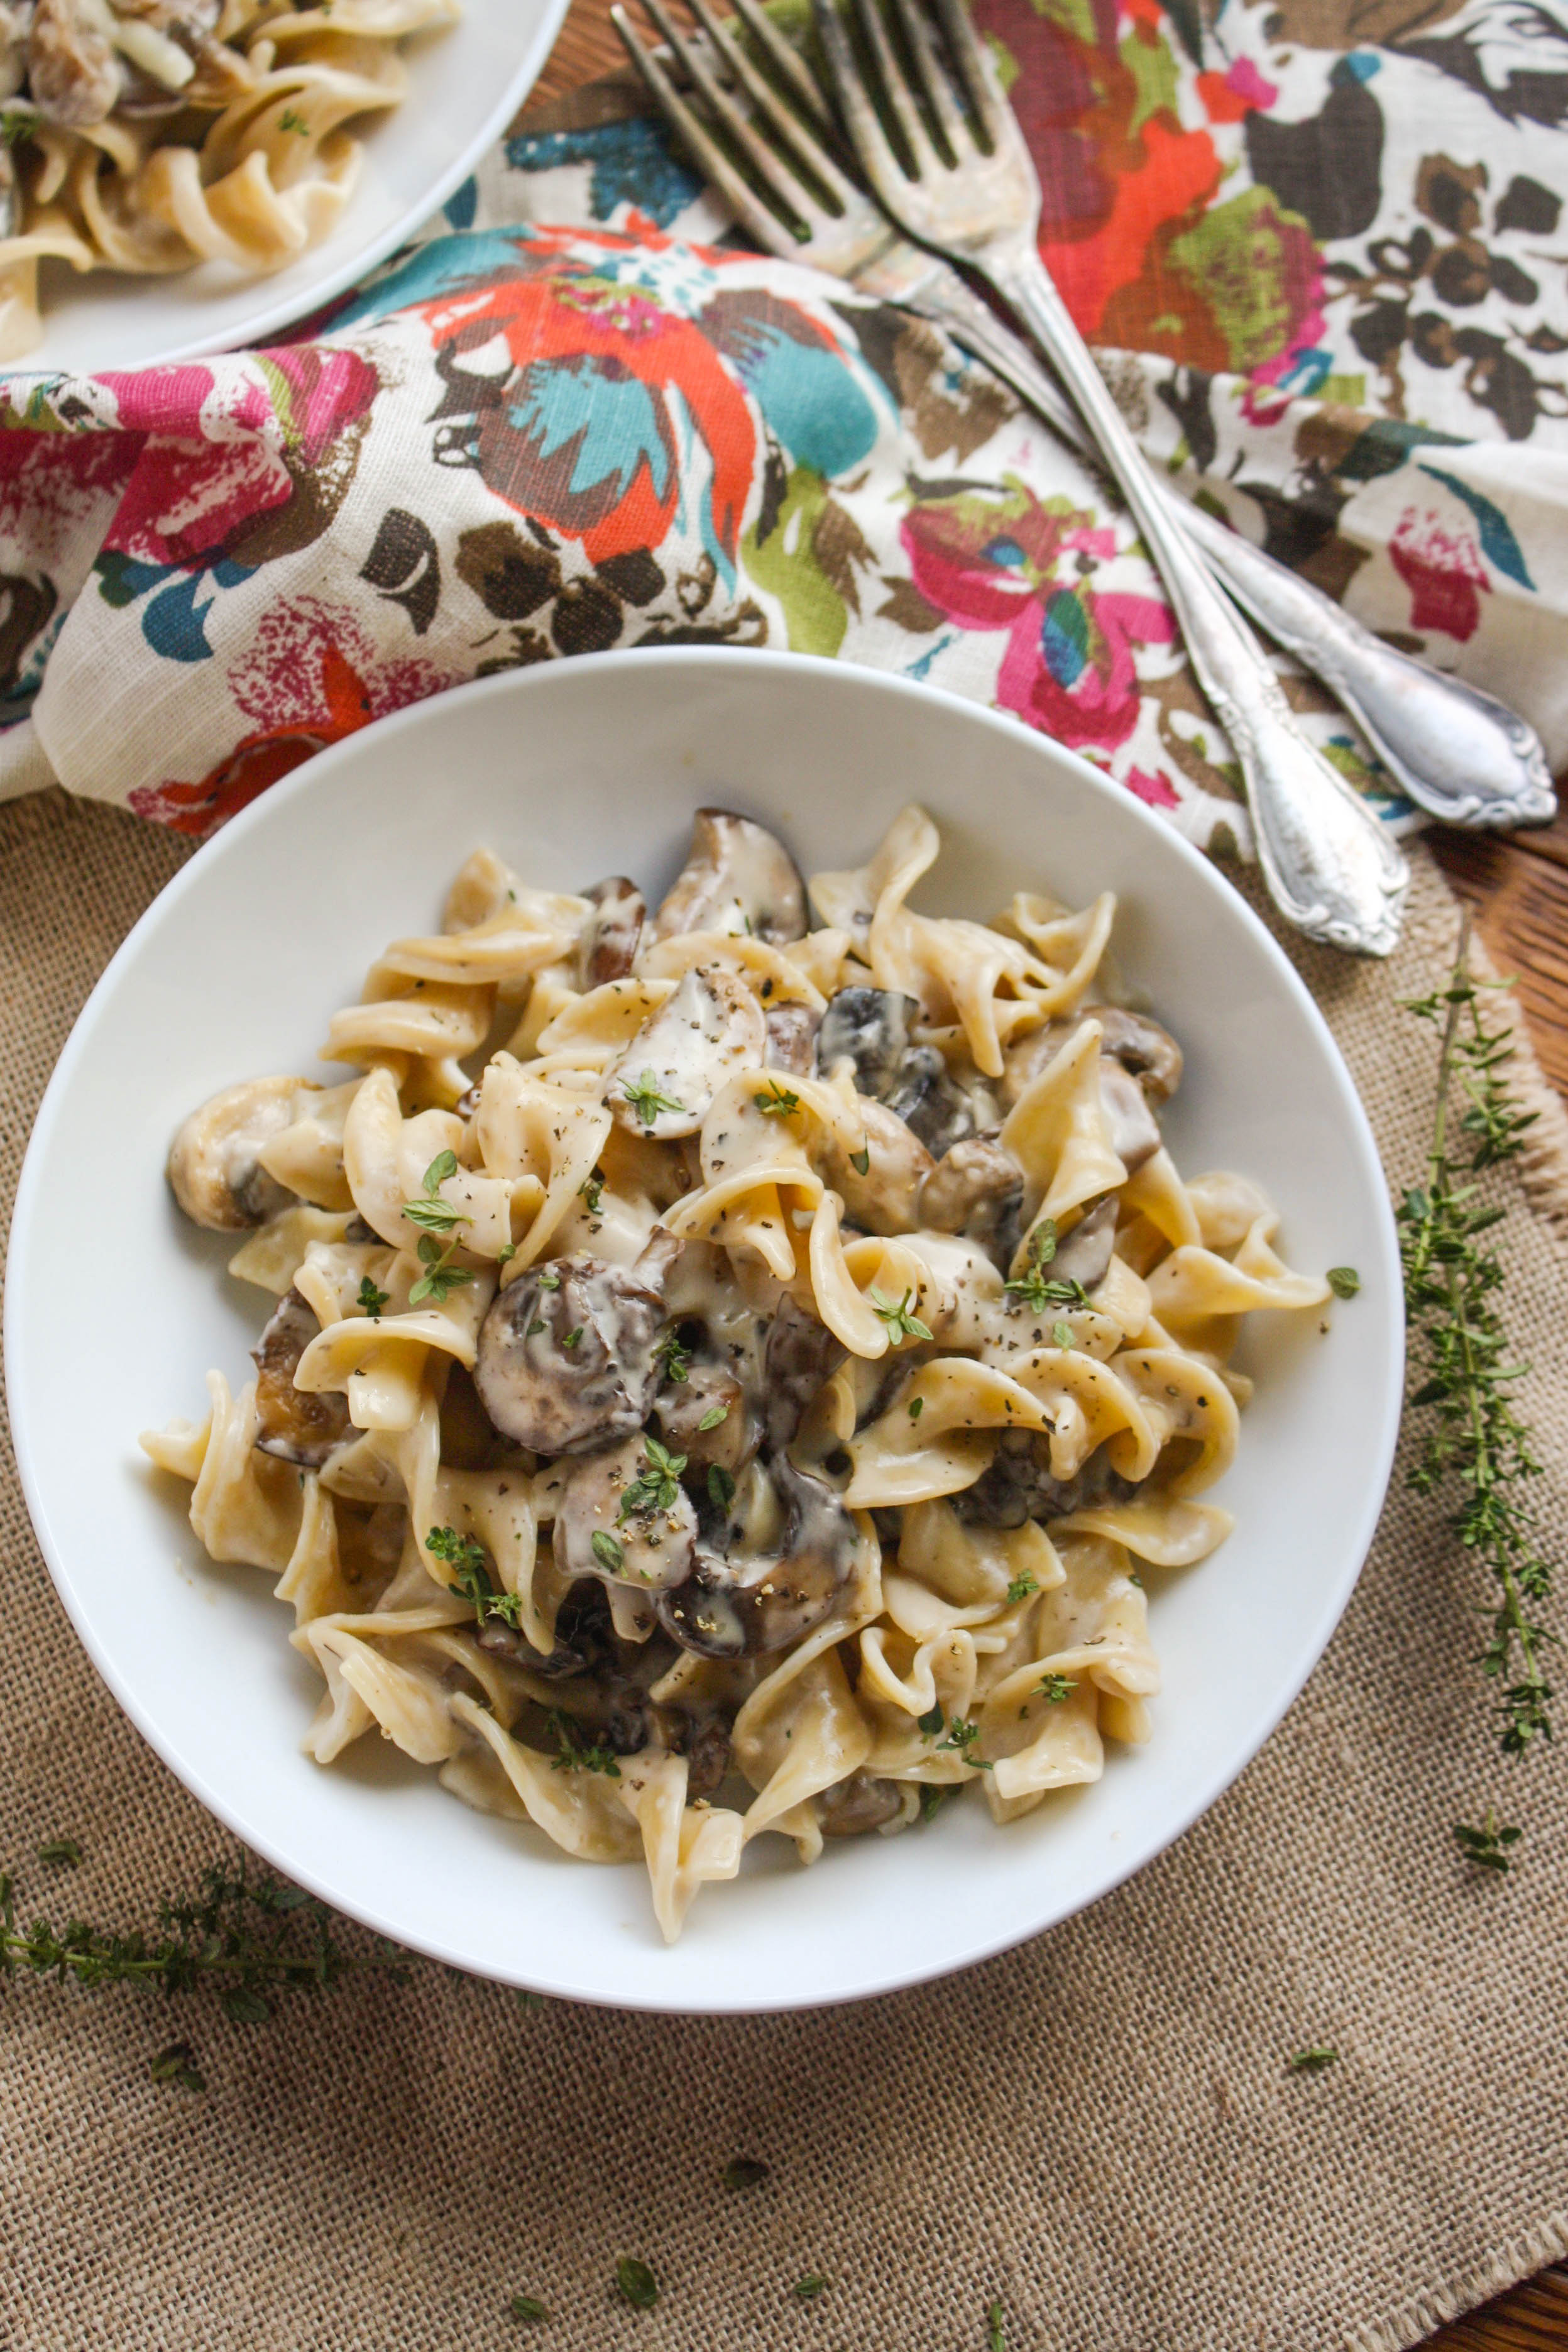 Mushroom Stroganoff is a hearty dish with a bit of a twist on a classic. You'll love the meaty mushrooms in this stroganoff dish.